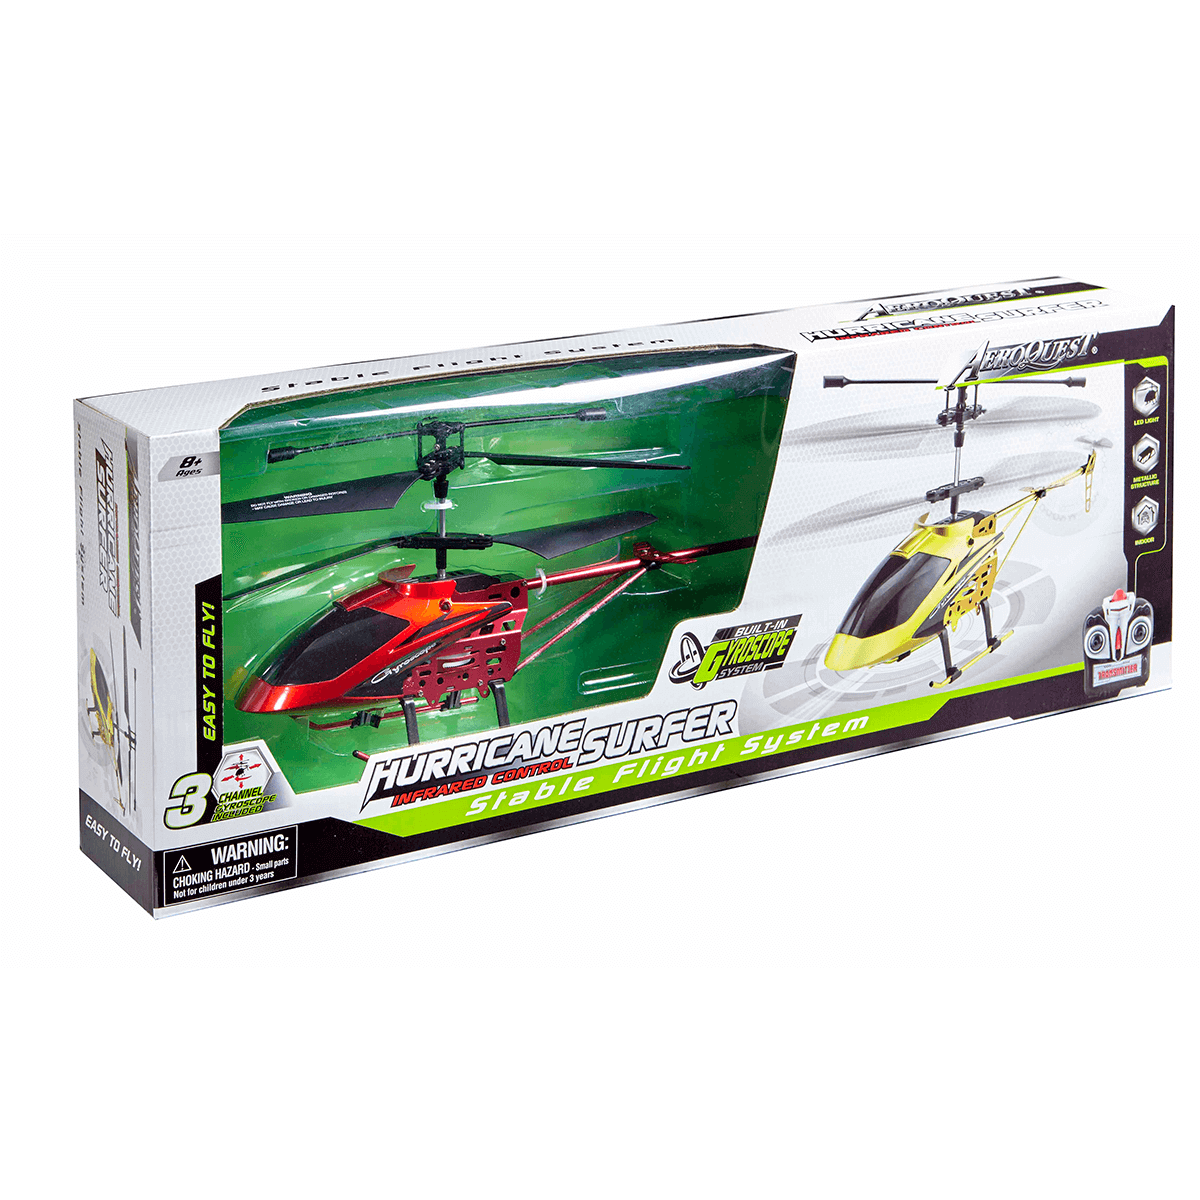 Hurricane Surfer RC Helicopter - Red